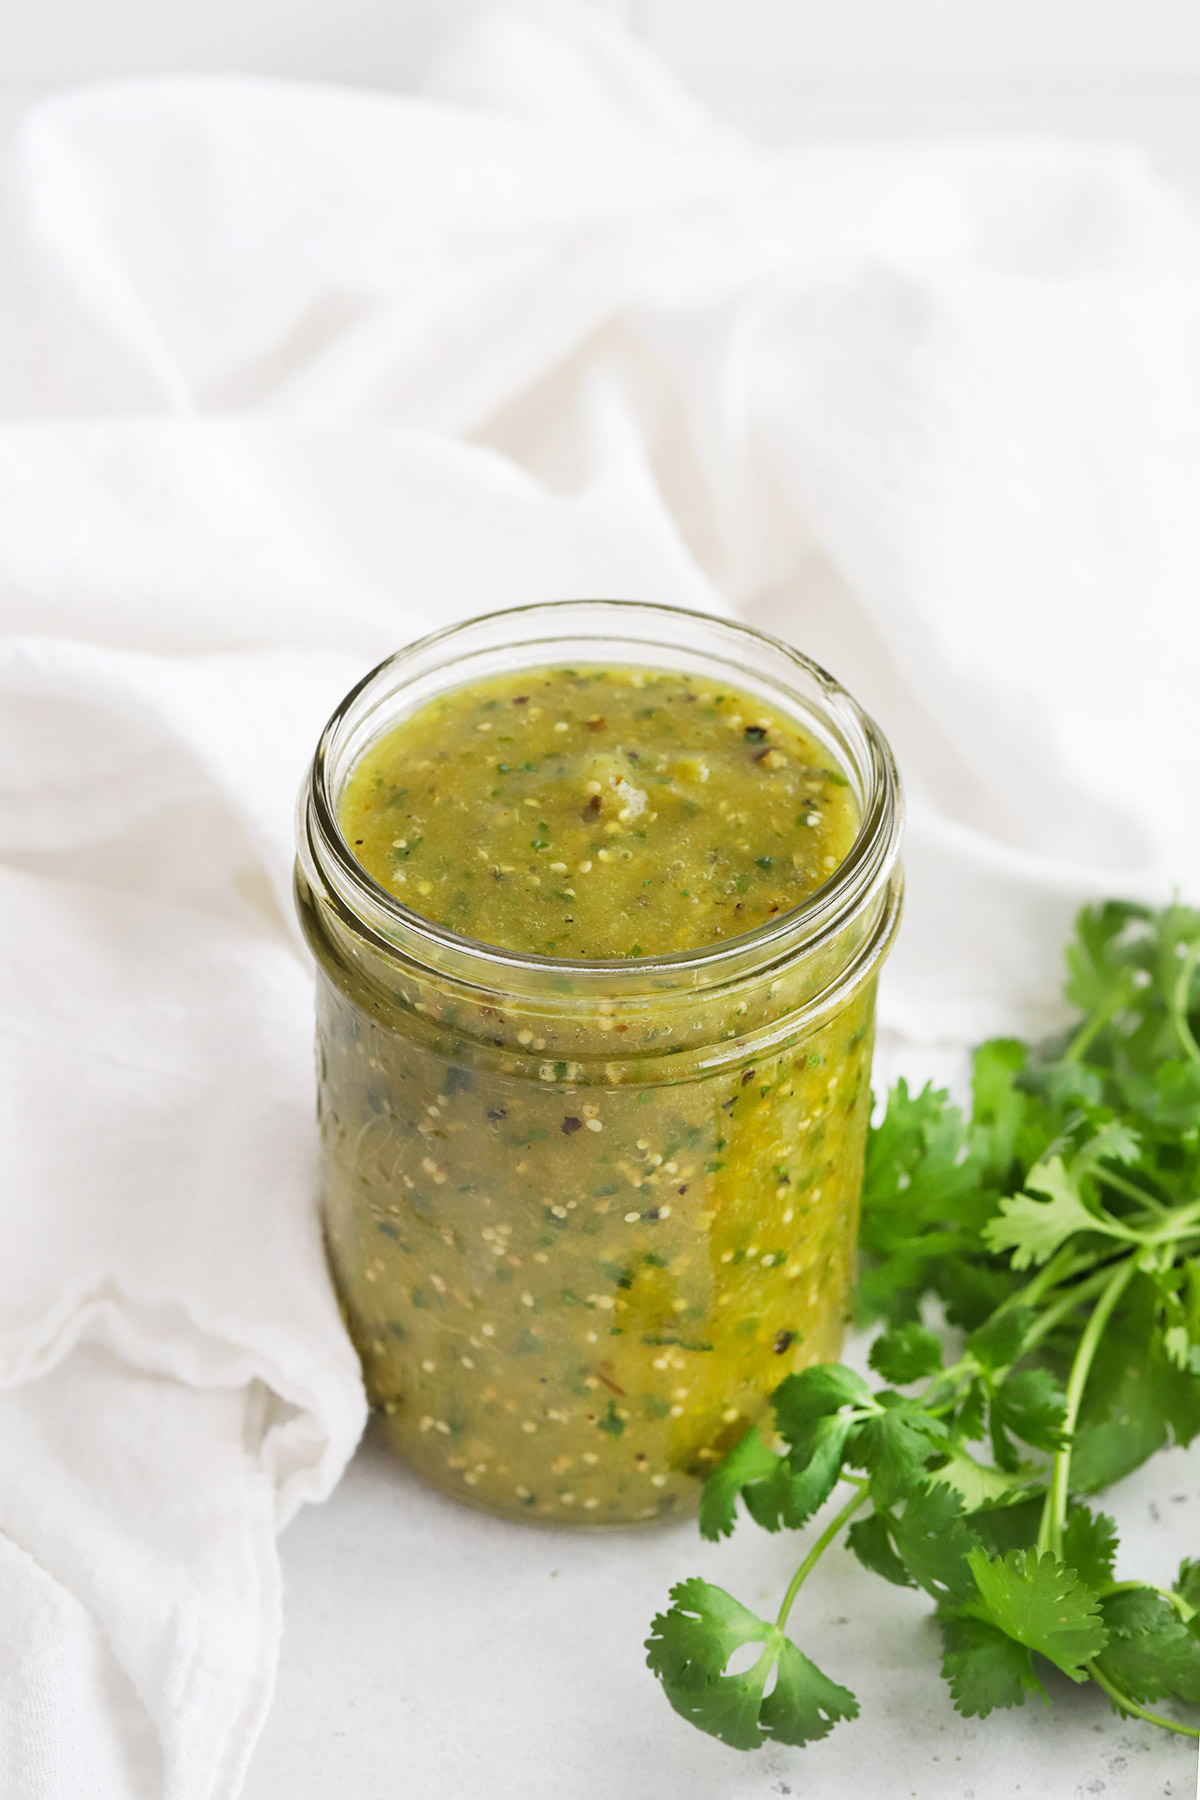 Jar of Homemade Salsa Verde (Green Salsa) with fresh cilantro on the side.